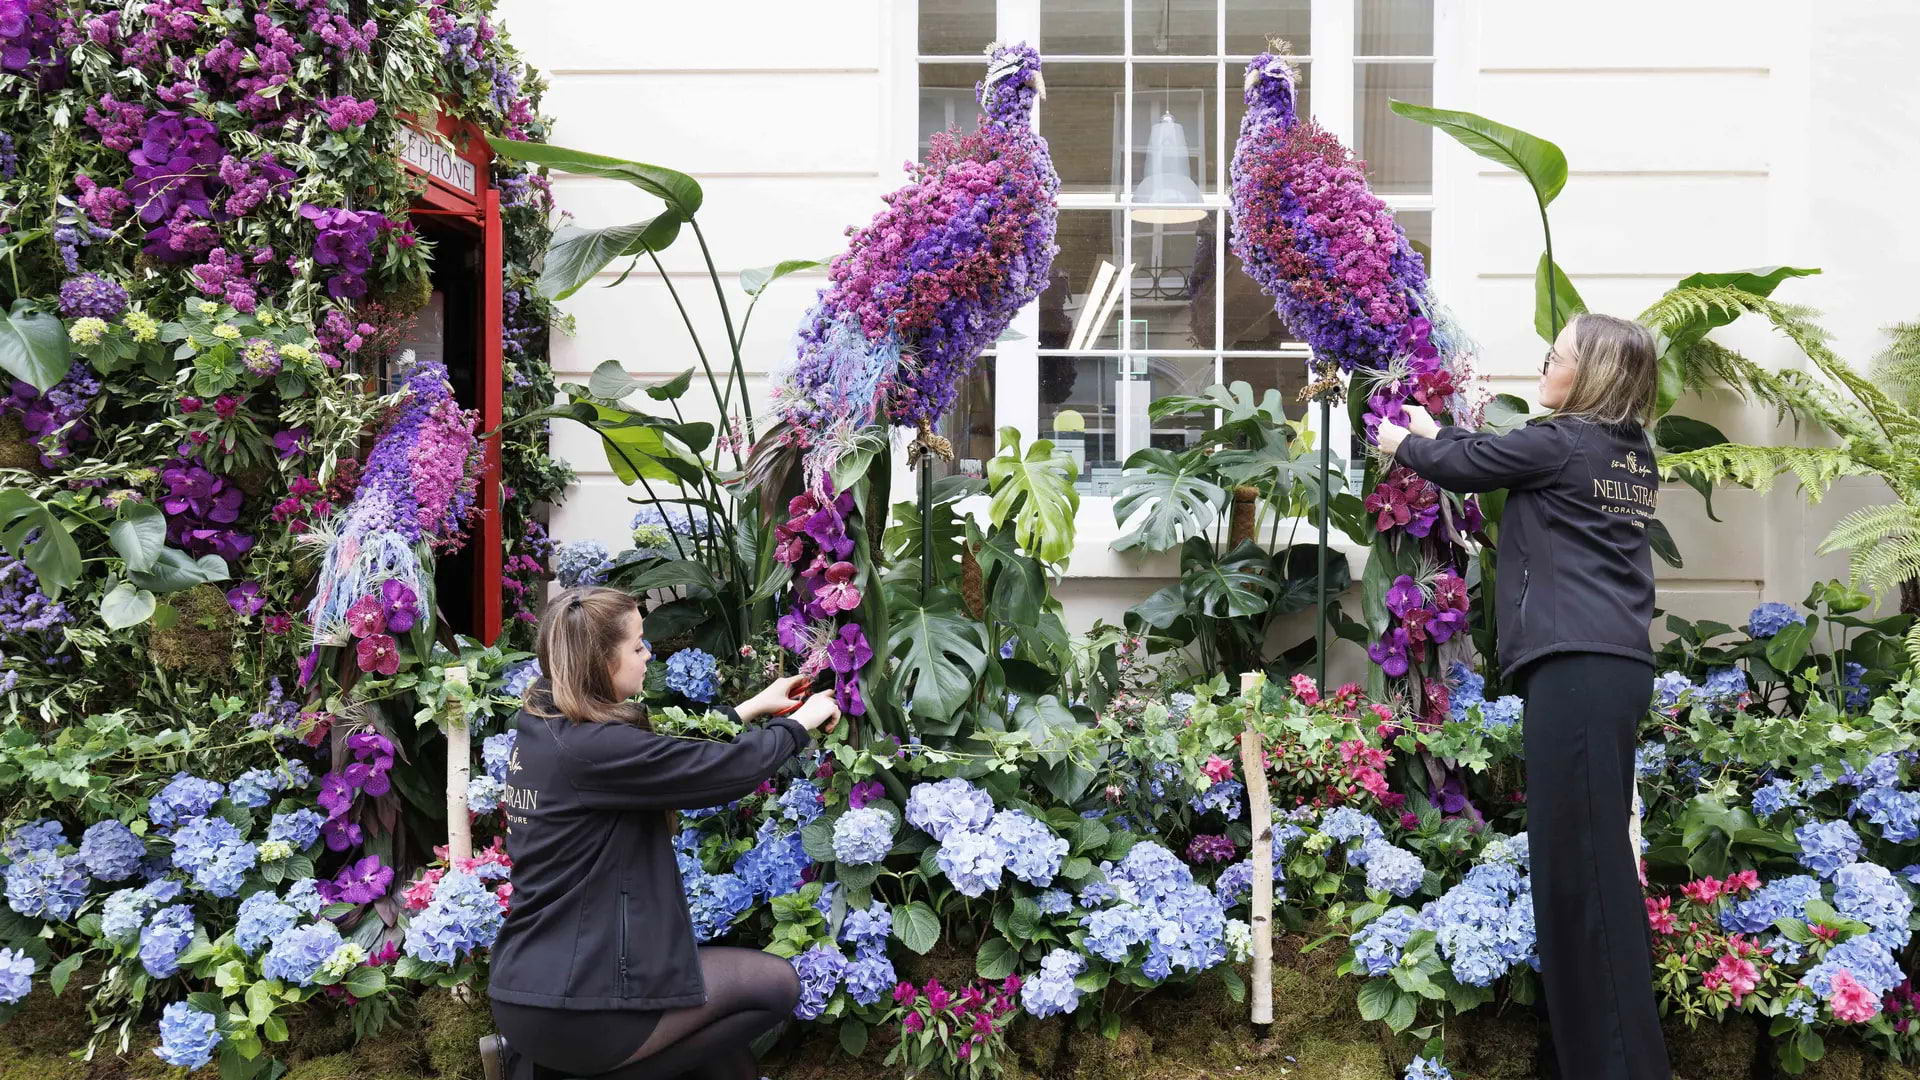 See Belgravia blooming with flowers this spring